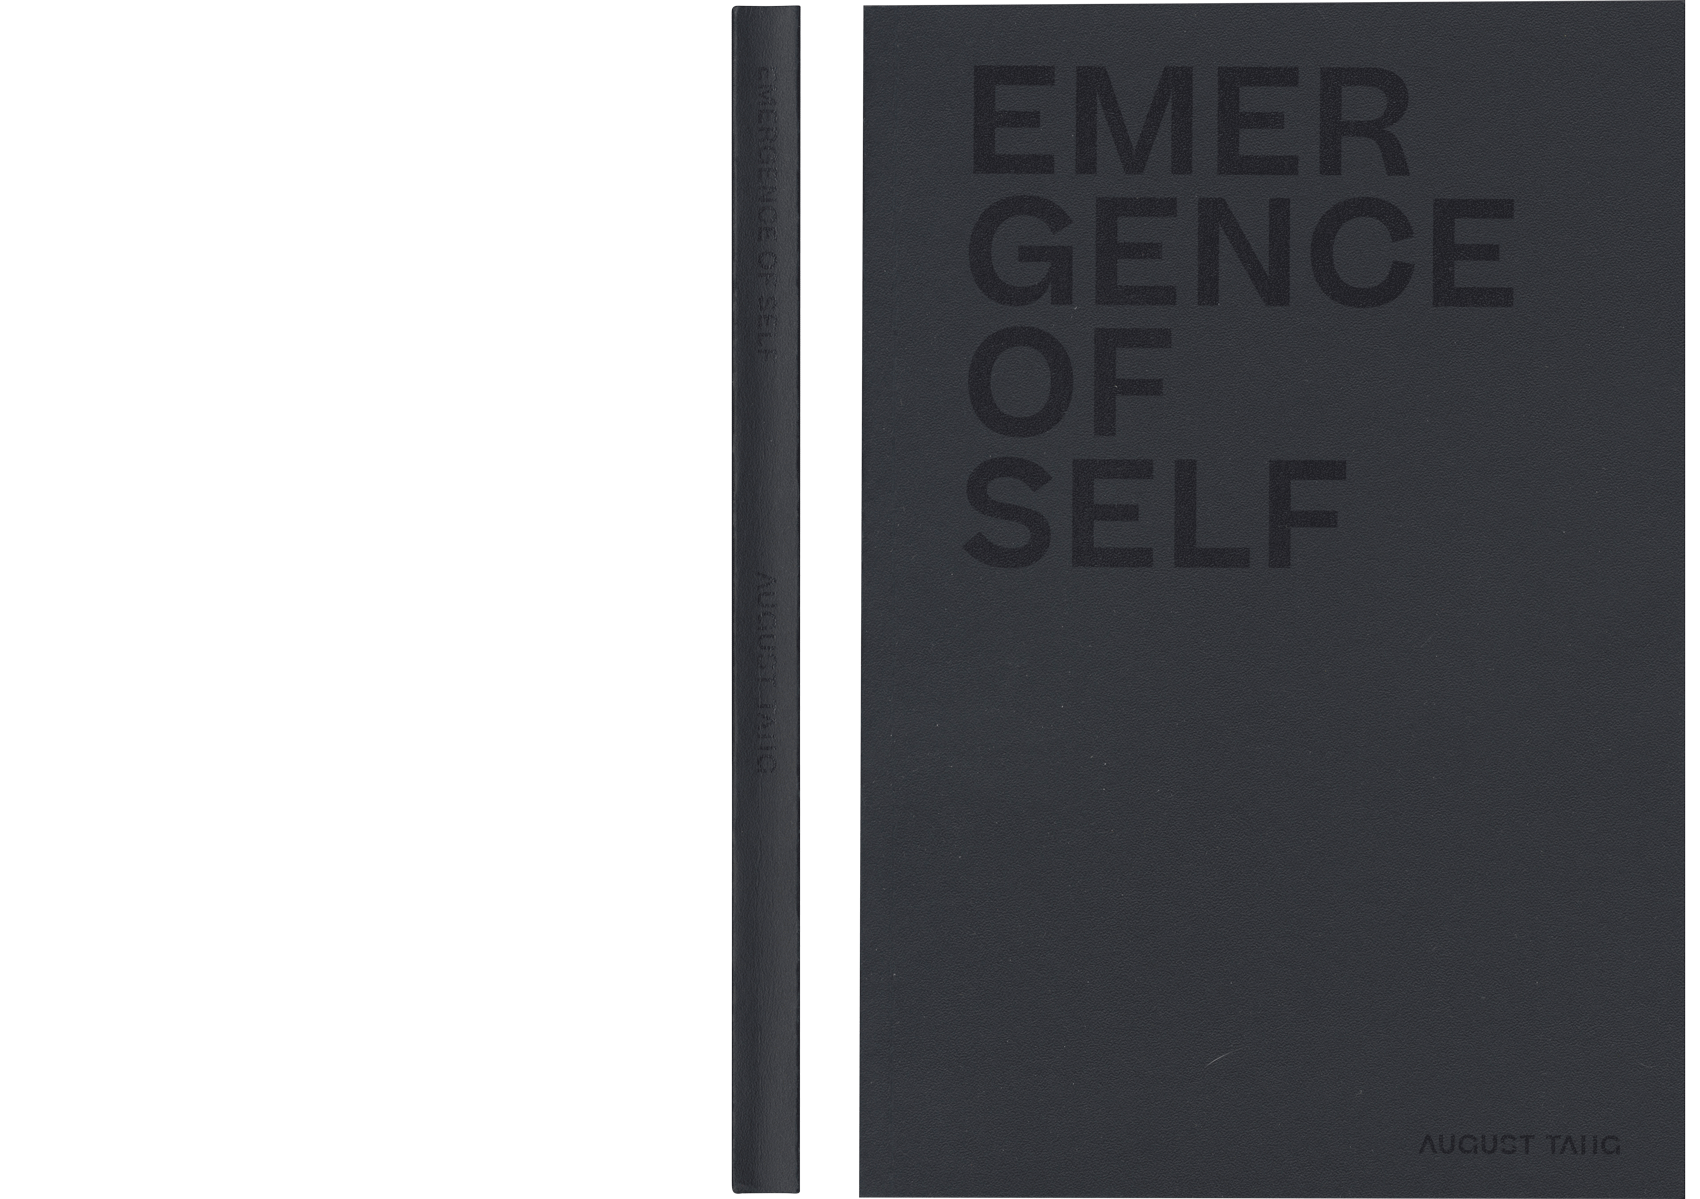 book cover titled "emergence of self"